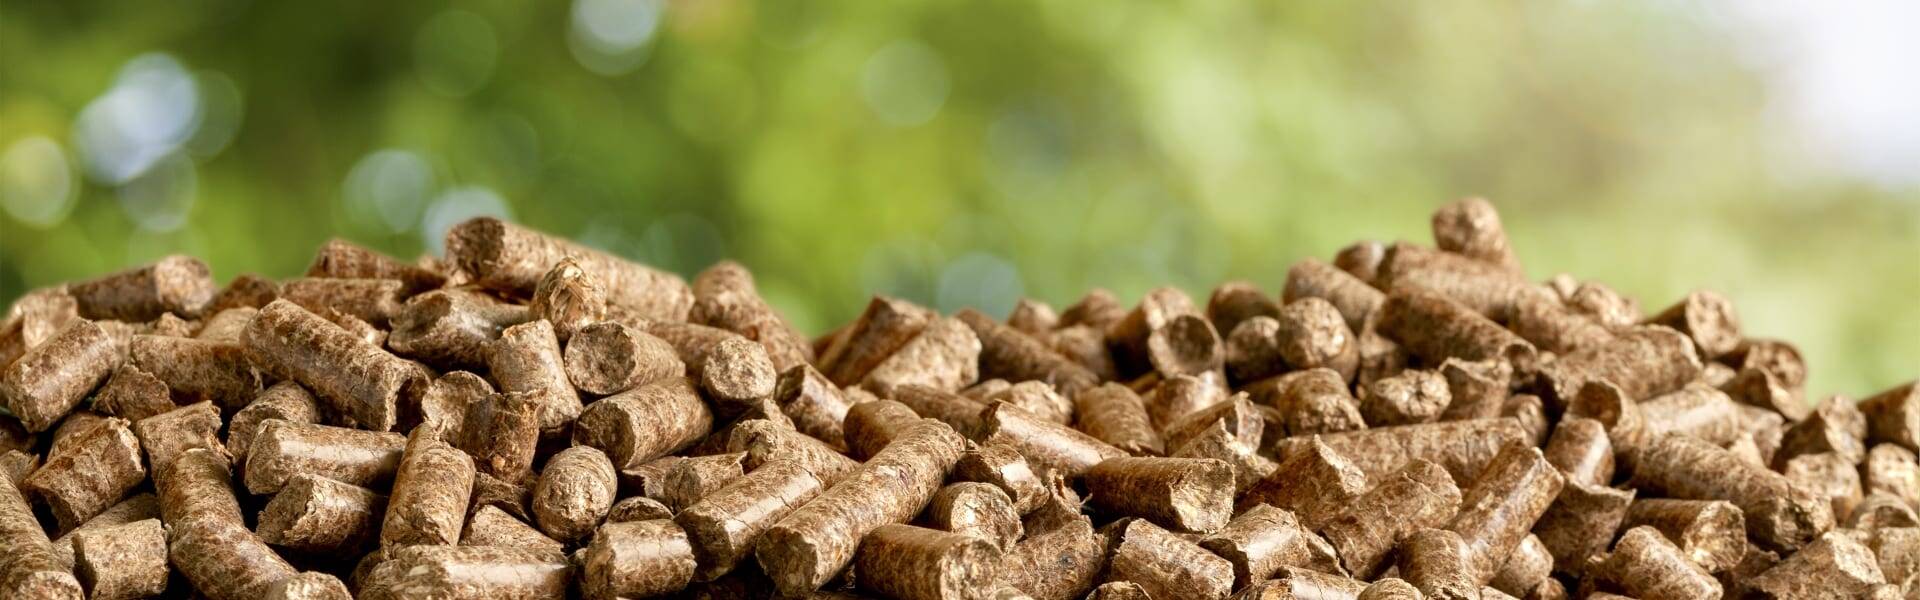 Trend away from dedicated biomass is growing